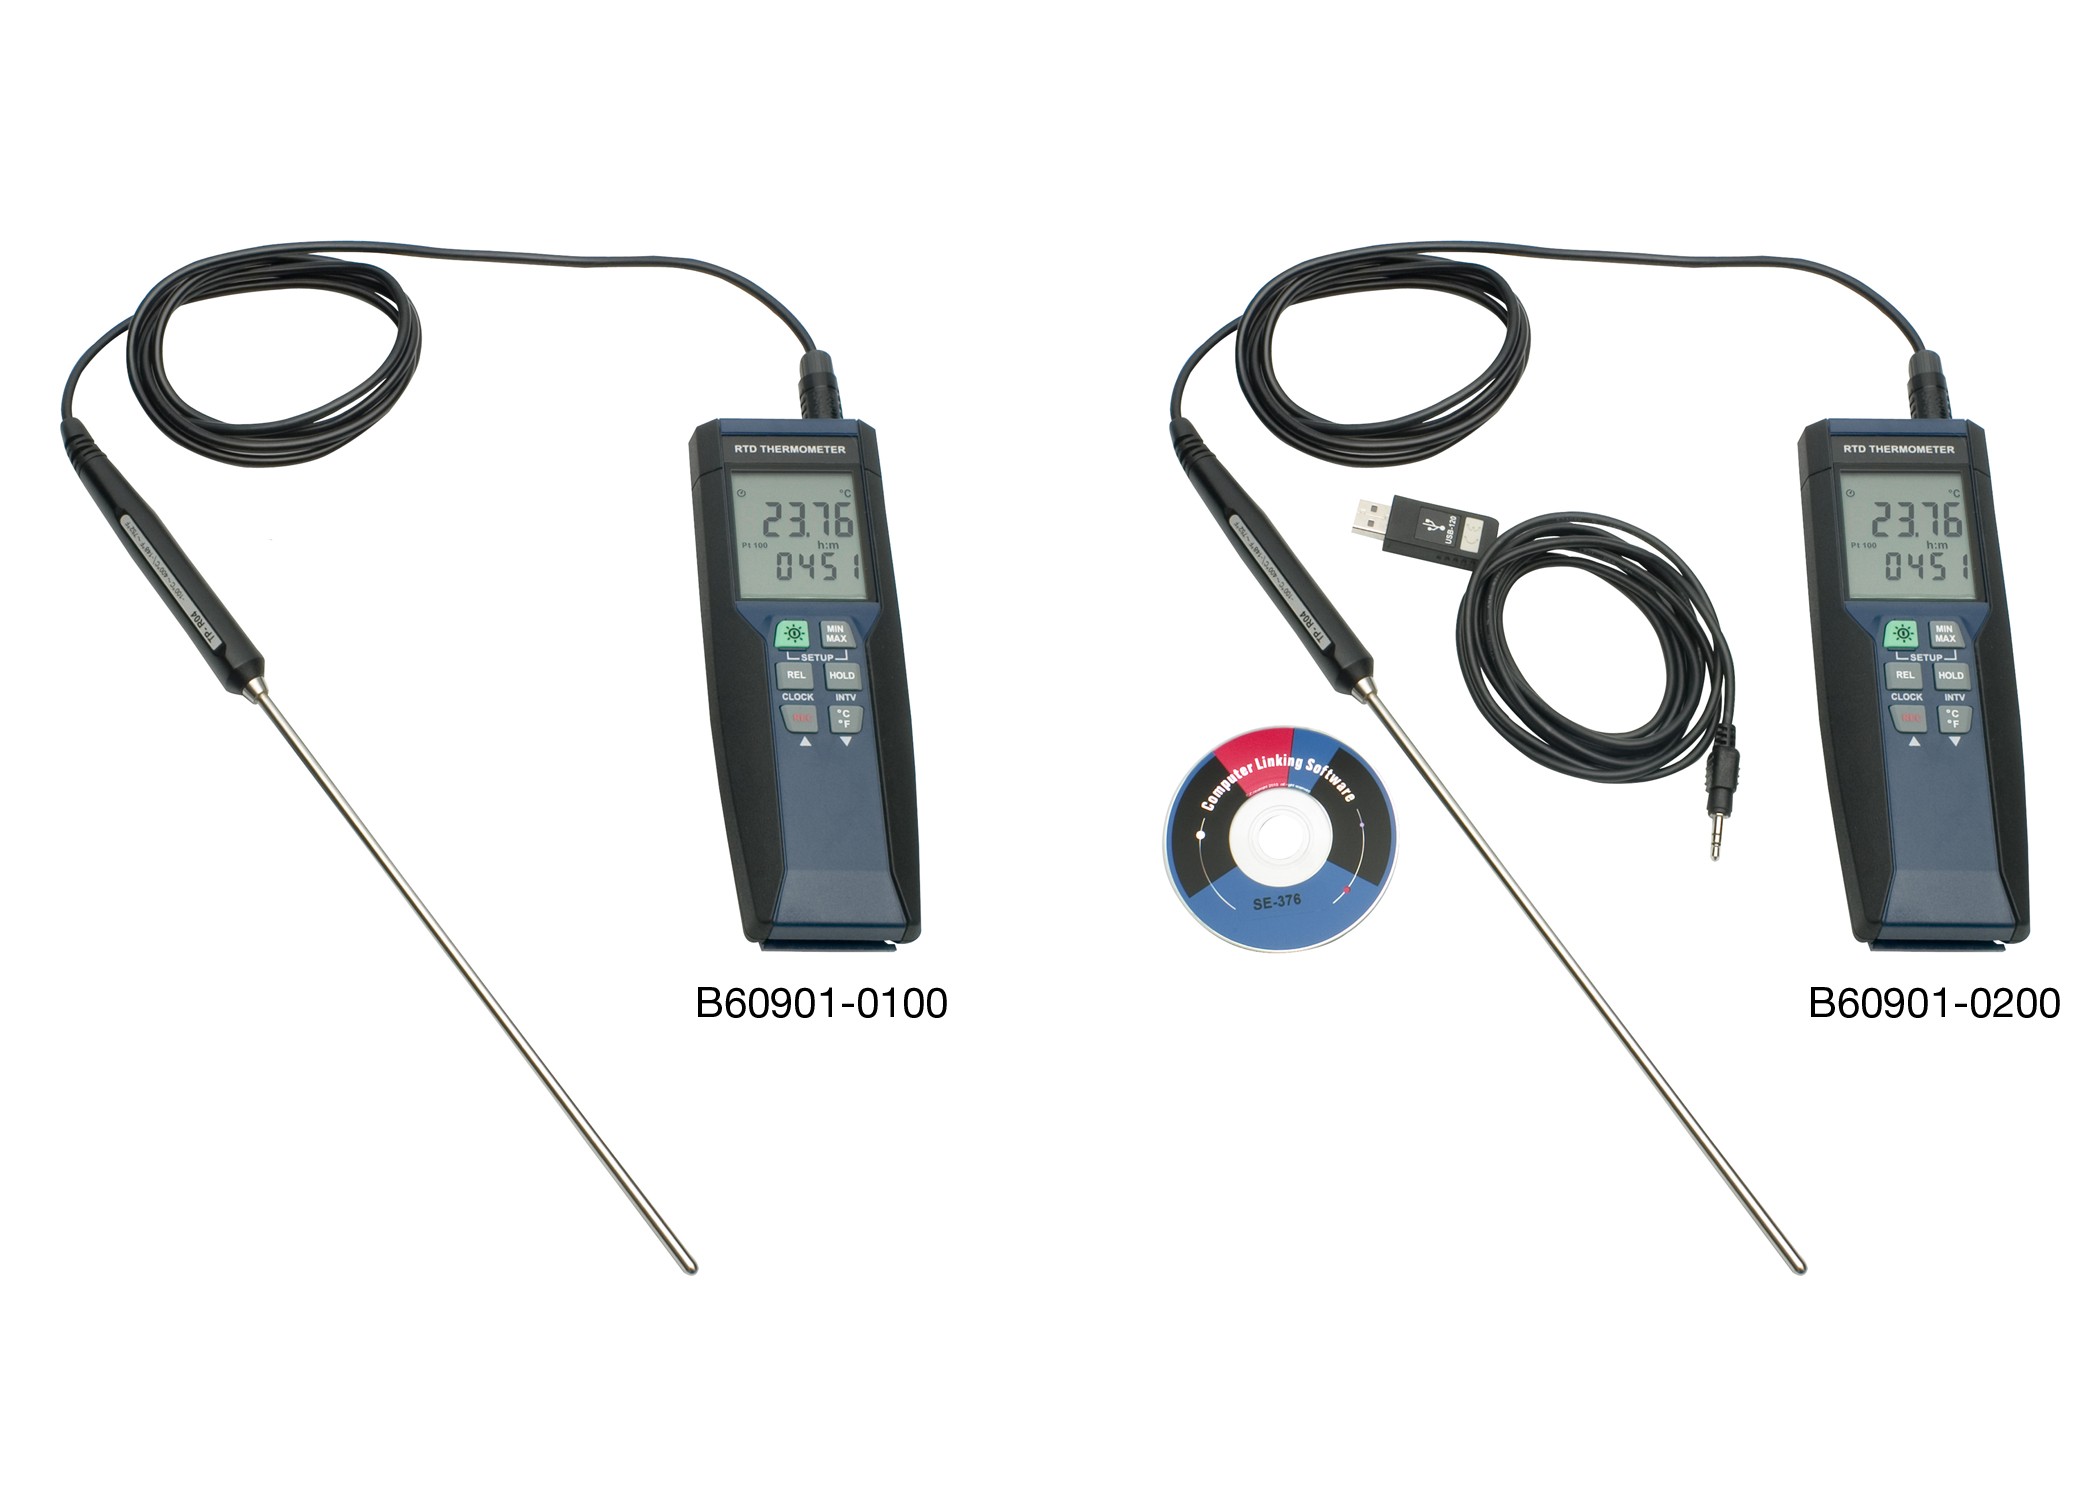 DURAC Electronic Surface-Temperature Thermometers